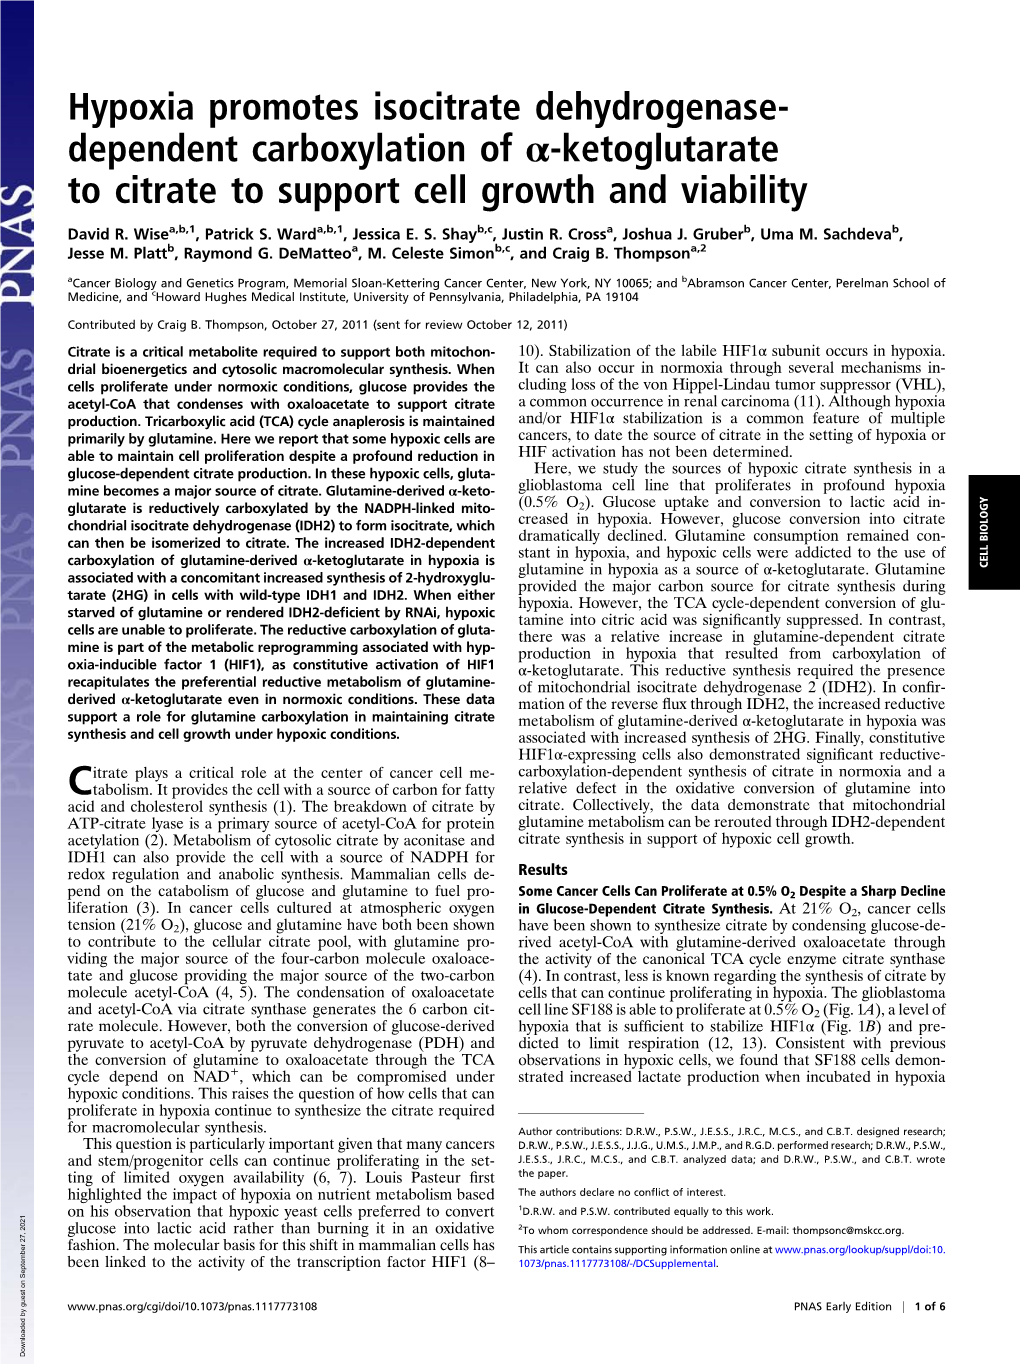 Dependent Carboxylation of Α-Ketoglutarate to Citrate to Support Cell Growth and Viability